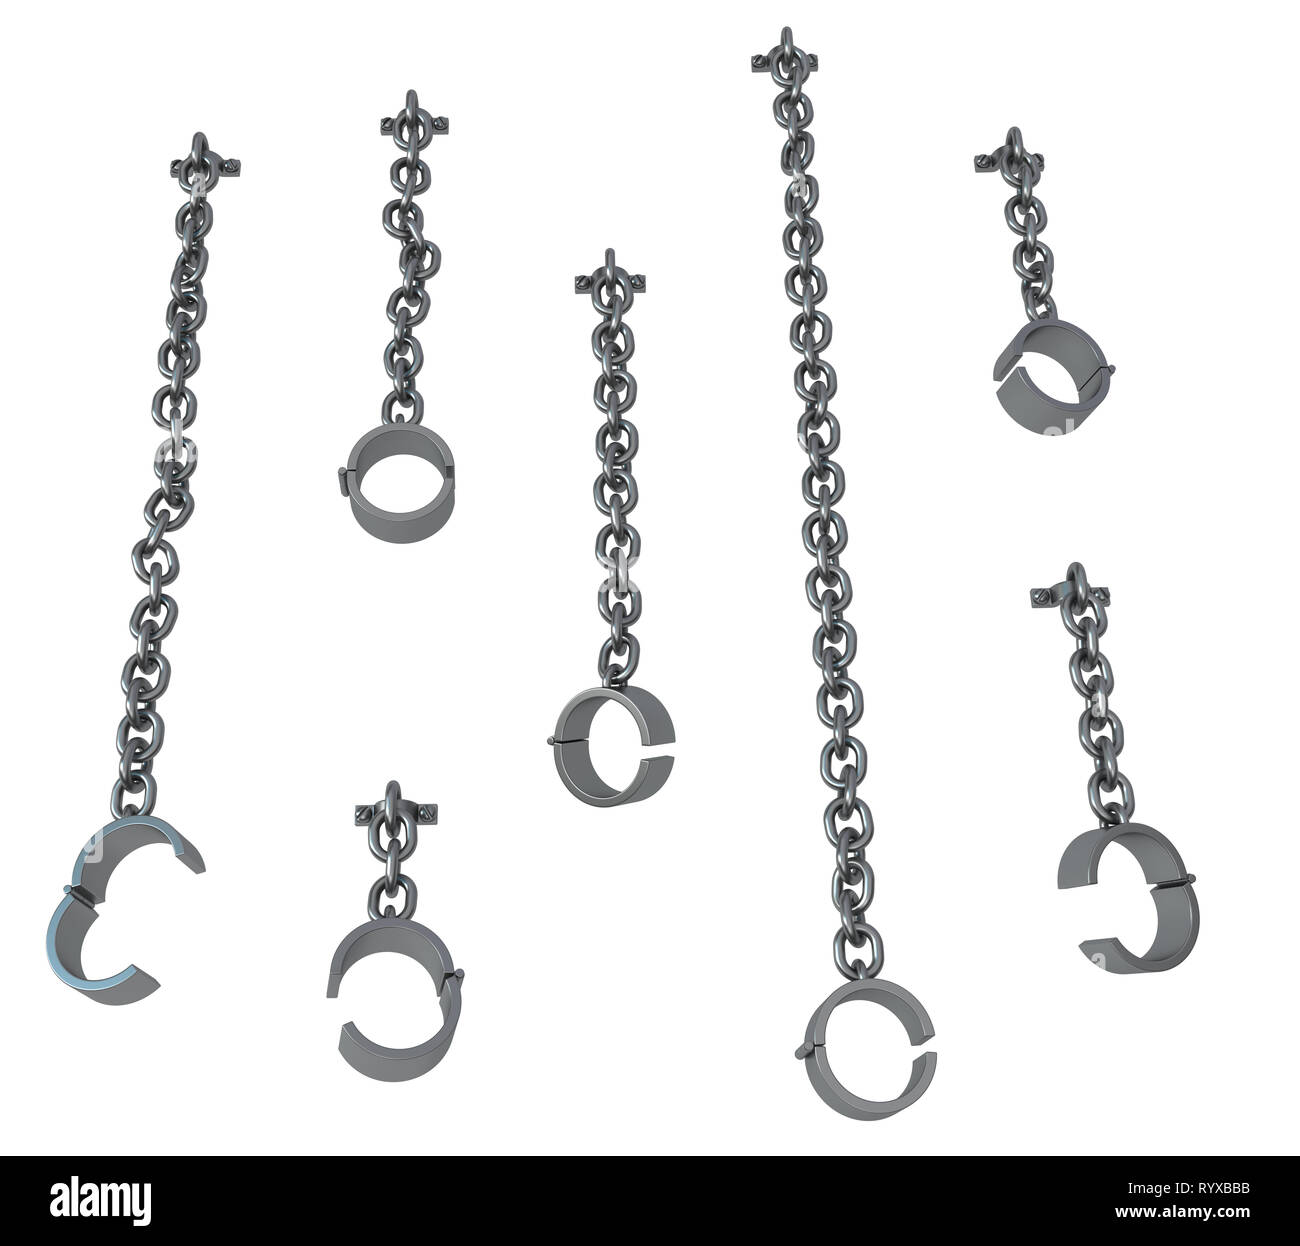 Shackles chain hanging set grey metal 3d illustration, isolated, horizontal, over white Stock Photo